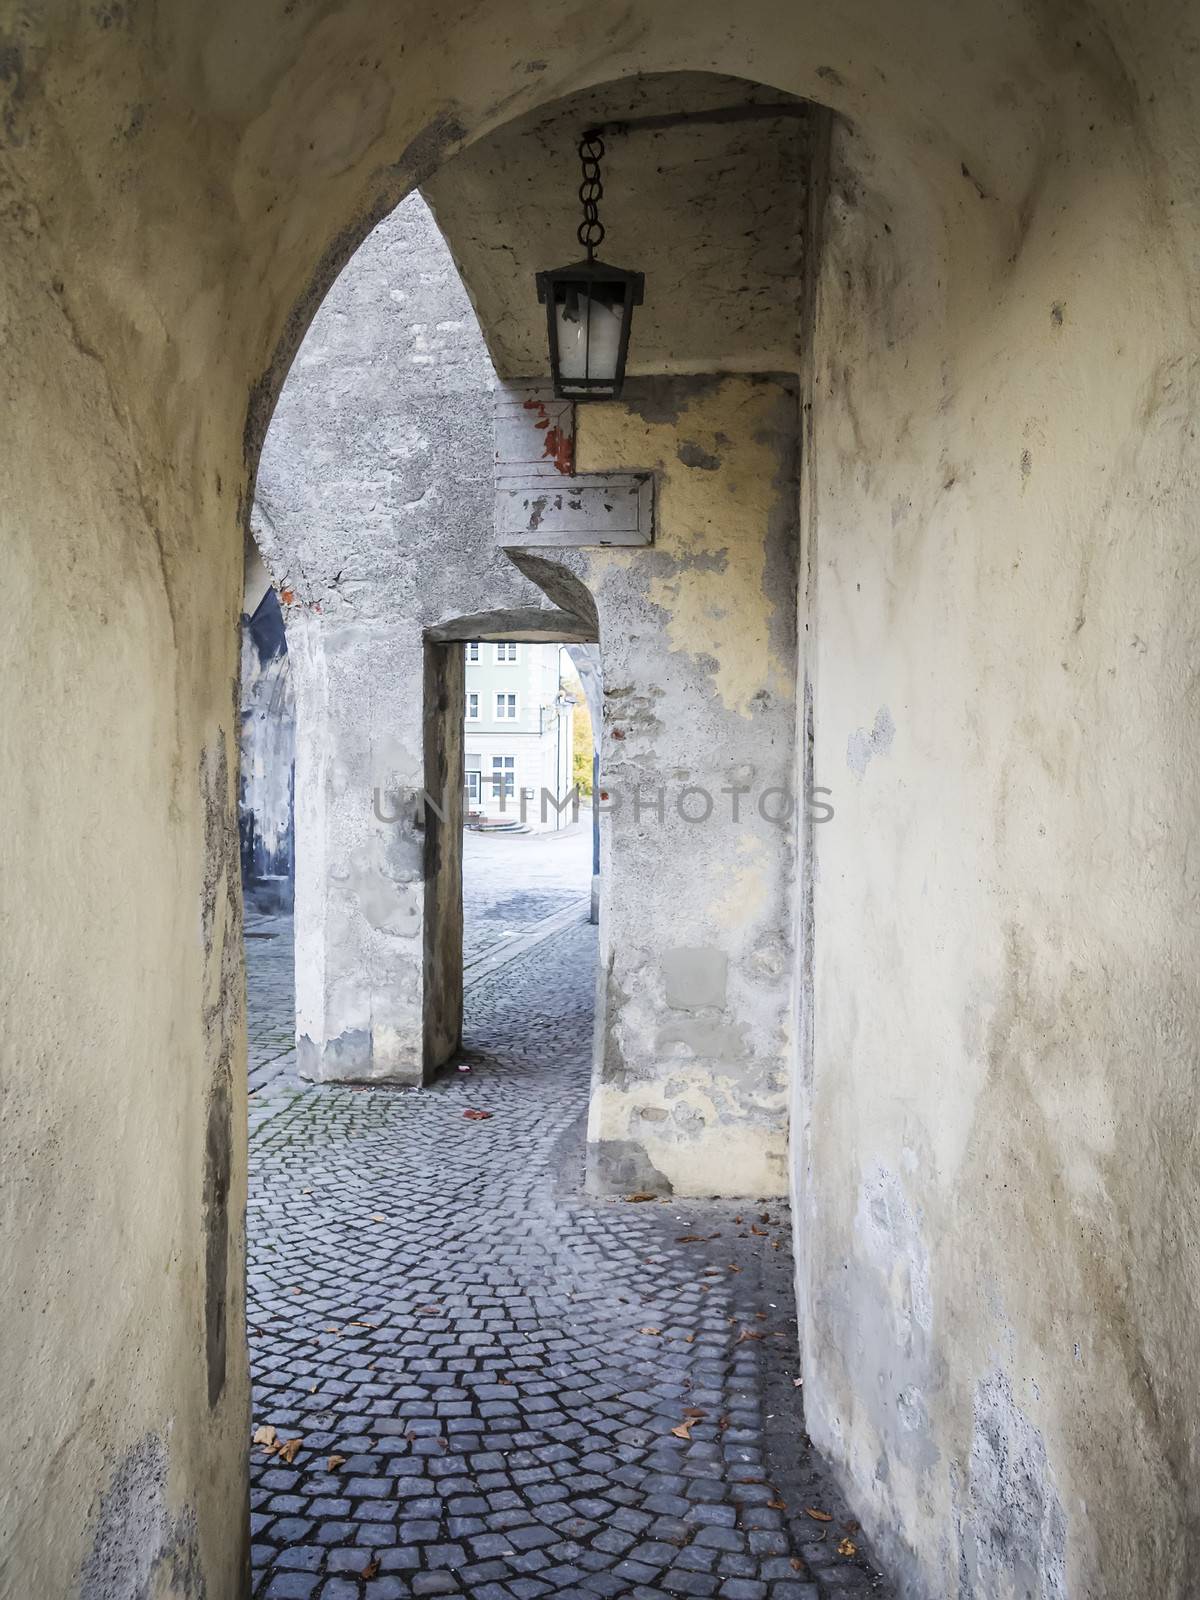 Medival archway in the town Landsberg am Lech in Bavaria, Germany